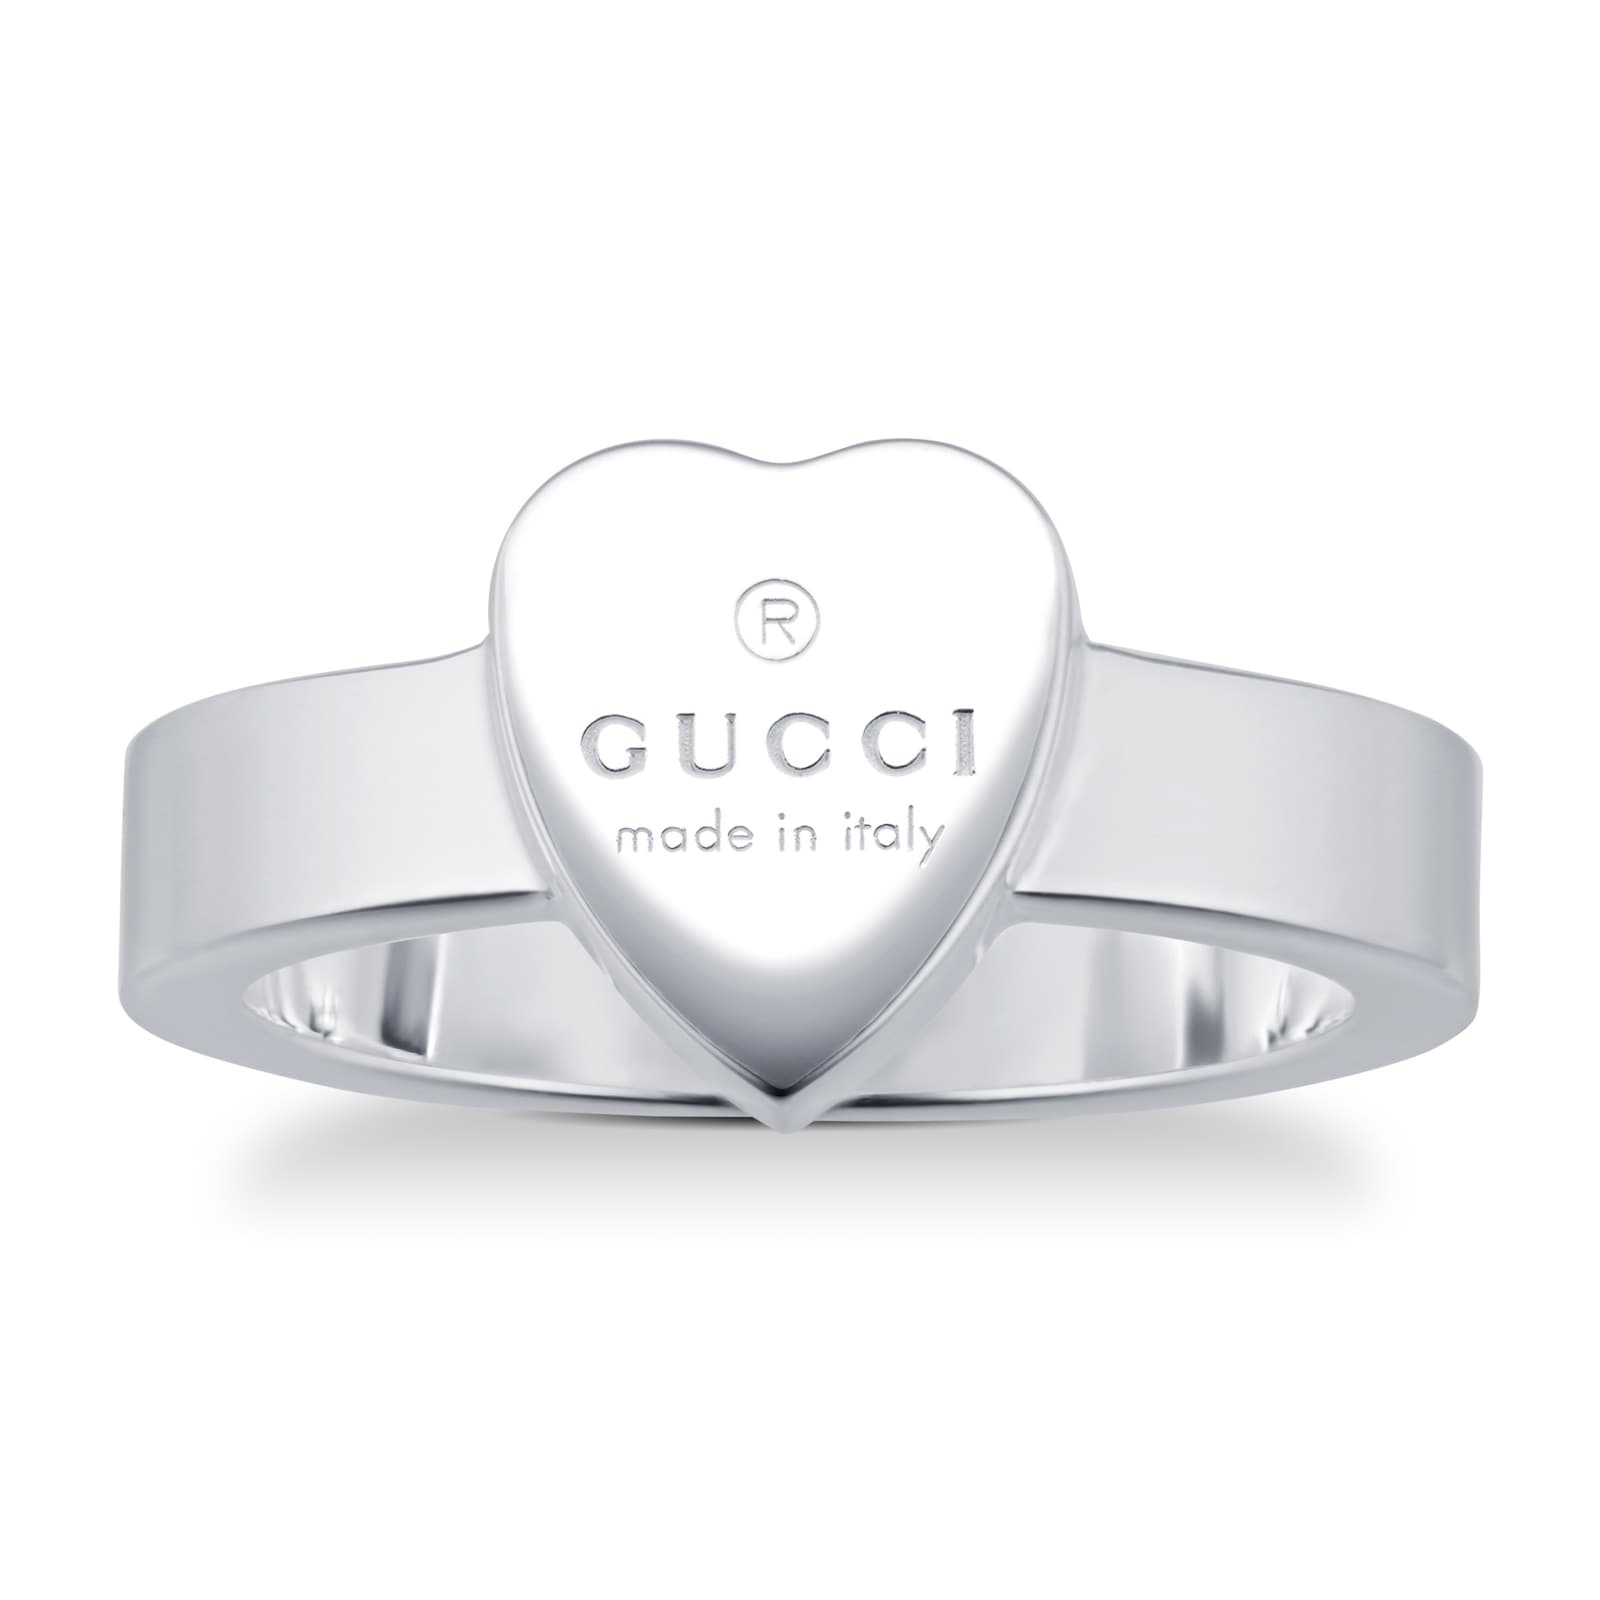 Trademark Silver Heart Ring - Ring Size M